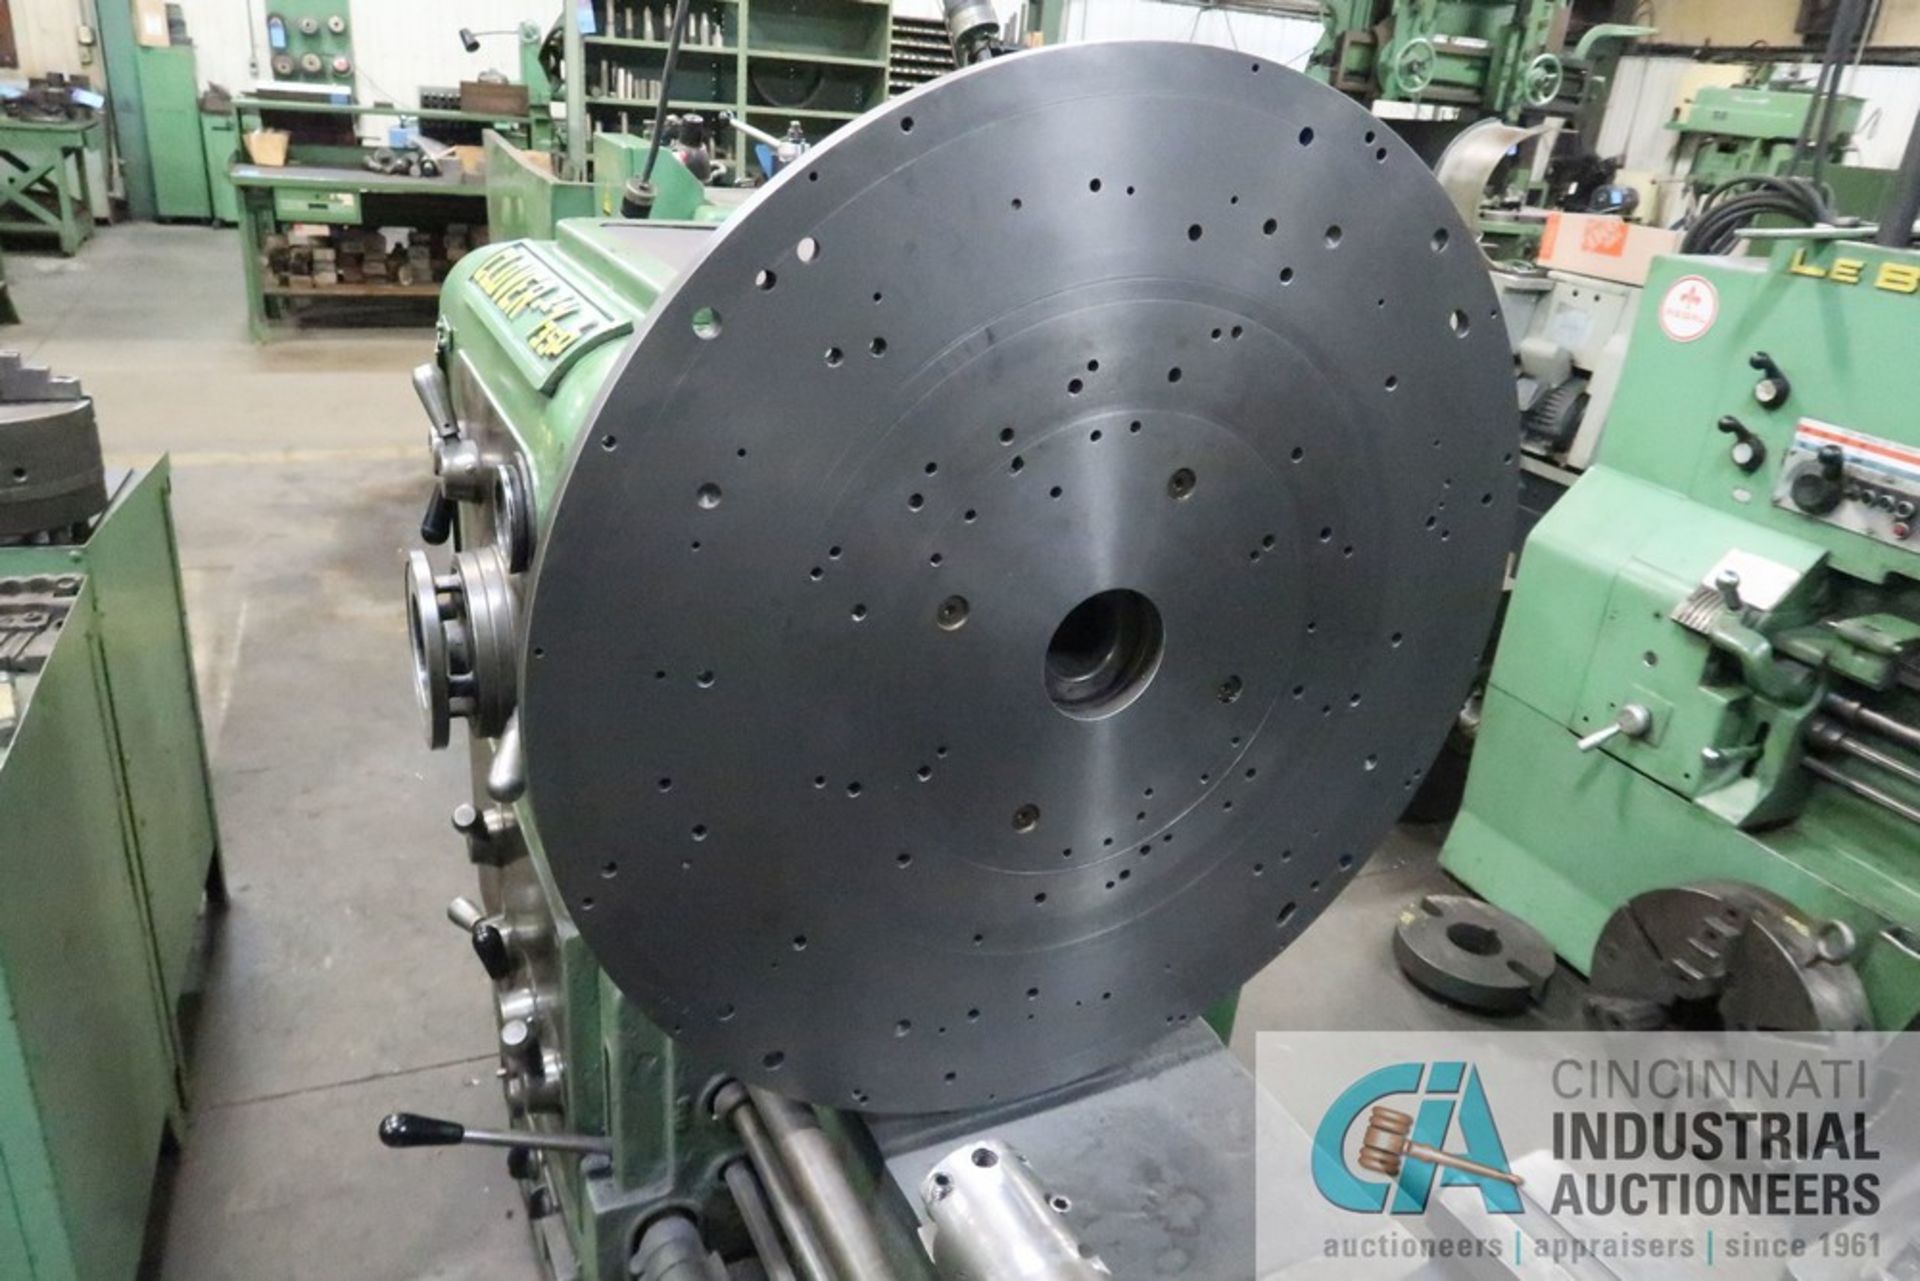 24" / 35" X 96" CLOVER GAP BED LATHE, 2-1/2" SPINDLE HOLE, 33-1/2" FACE PLATE, STEADY REST, WITH - Image 8 of 15